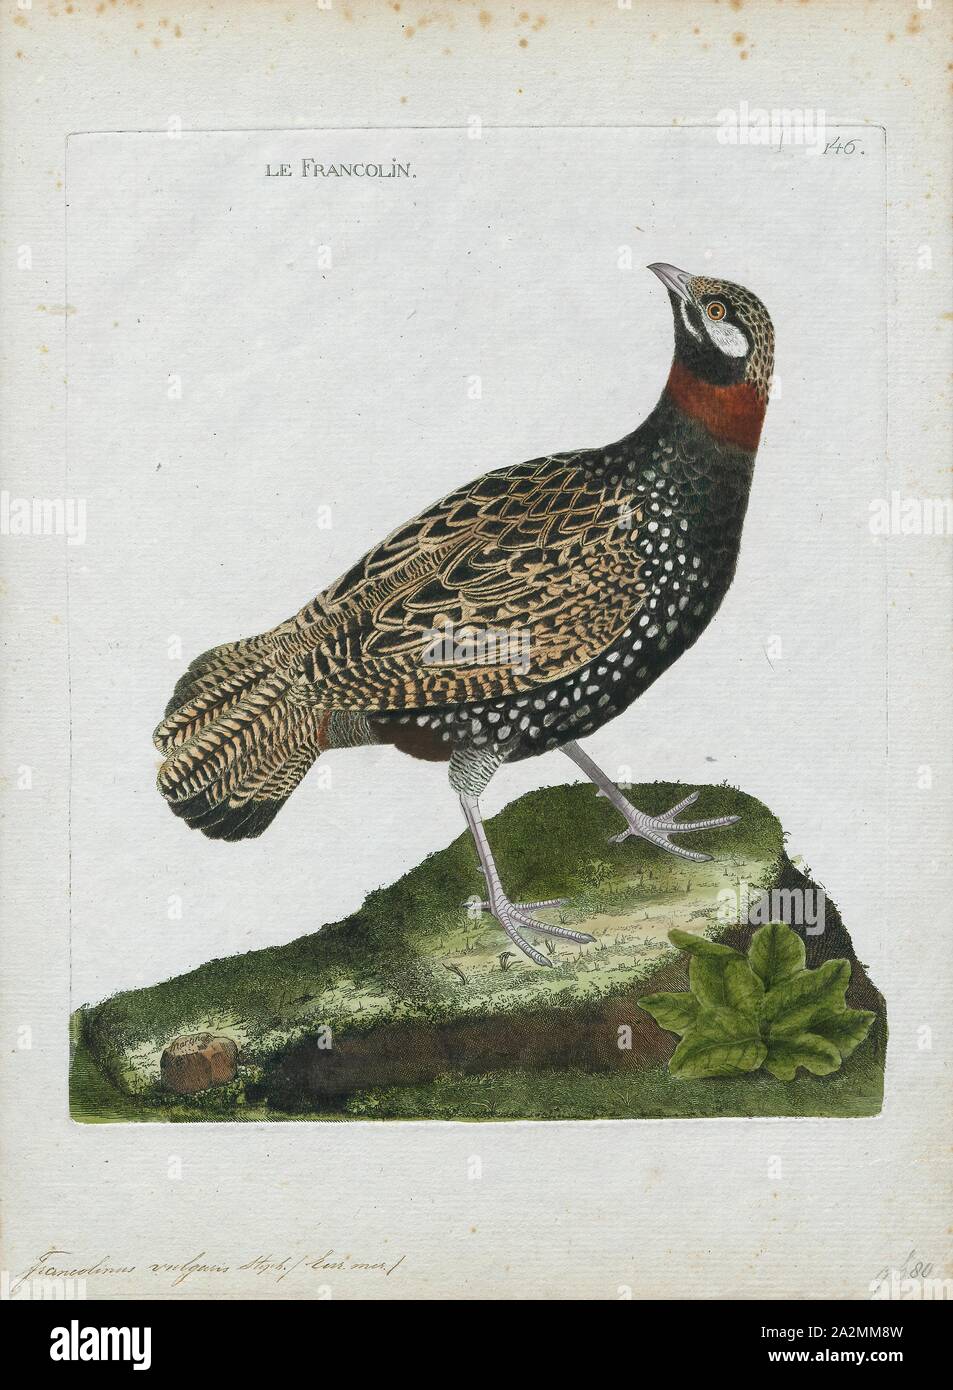 Francolinus vulgaris, Print, Francolinus is a genus of birds in the francolin group of the partridge subfamily of the pheasant family. Its five species range from western Asia and central Asia through to southern Asia and south-eastern Asia., 1790-1796 Stock Photo